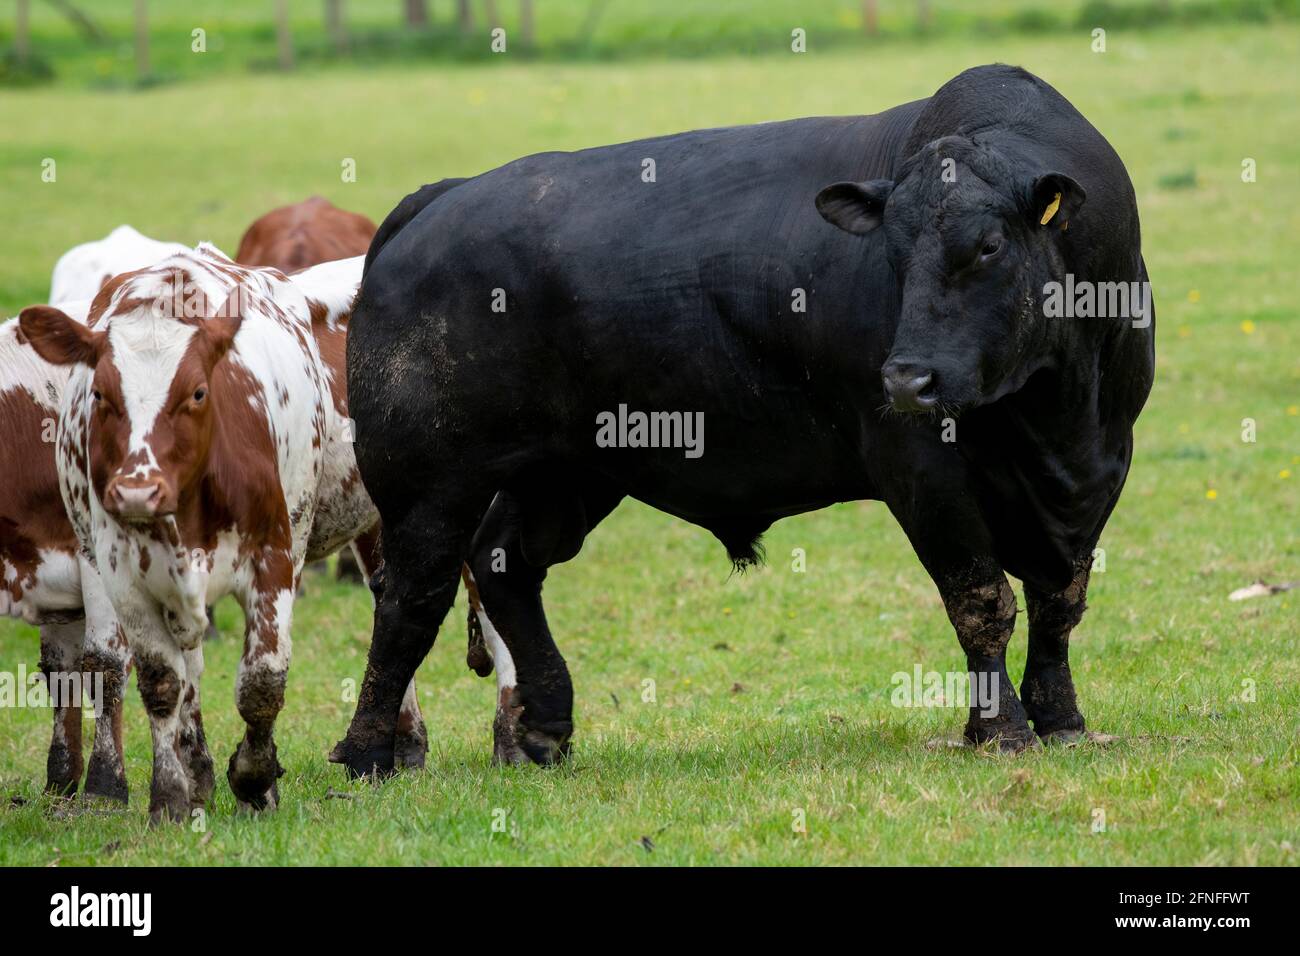 Twice the size: An Aberdeen Angus Beef Bull alongside an Ayreshire cow, Beningbrough, North Yorkshire, UK Stock Photo